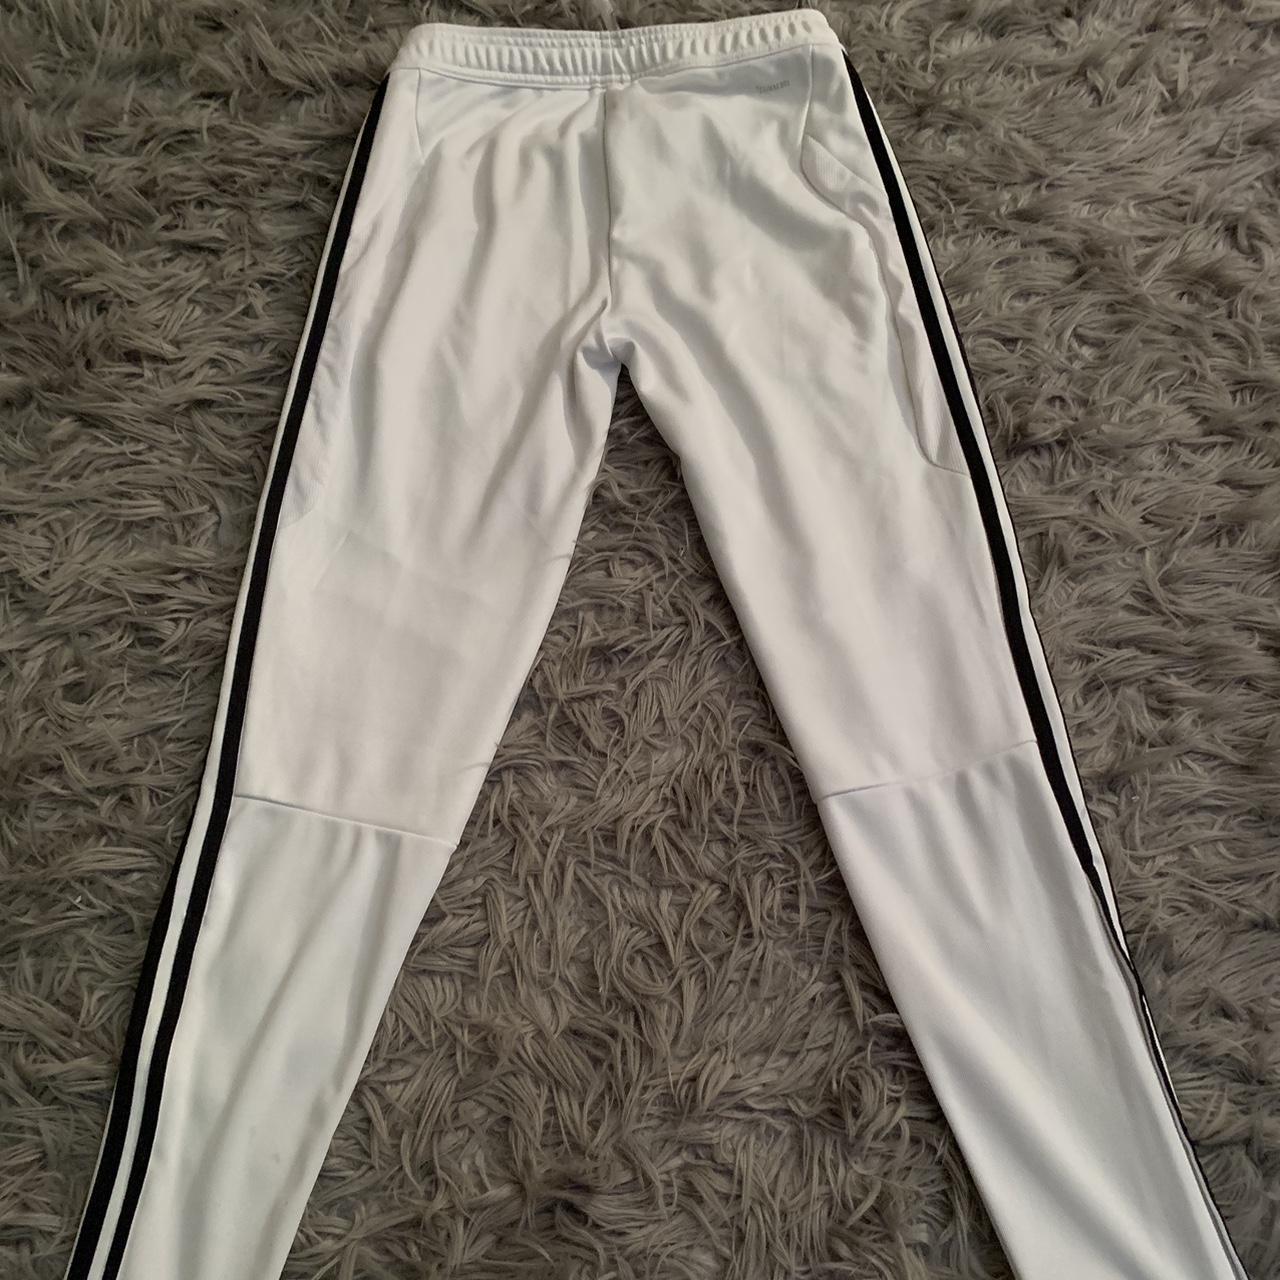 Adidas Women's White and Black Trousers (2)